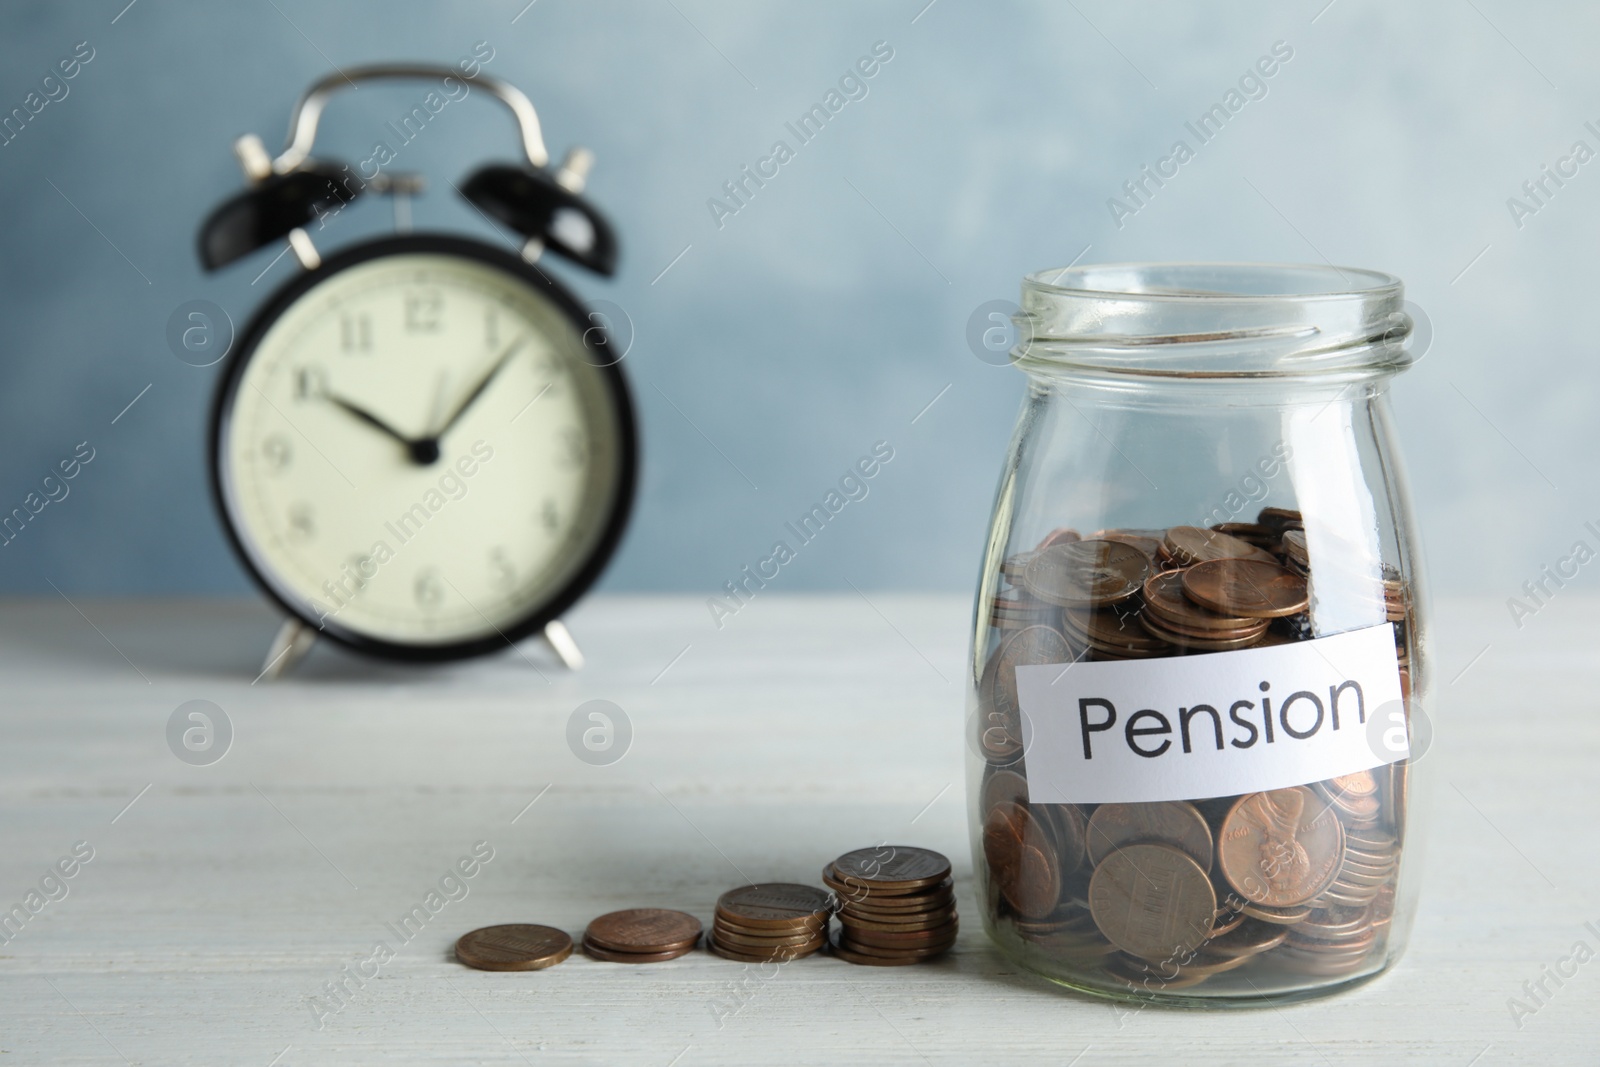 Photo of Glass jar with label PENSION and coins near alarm clock on white table